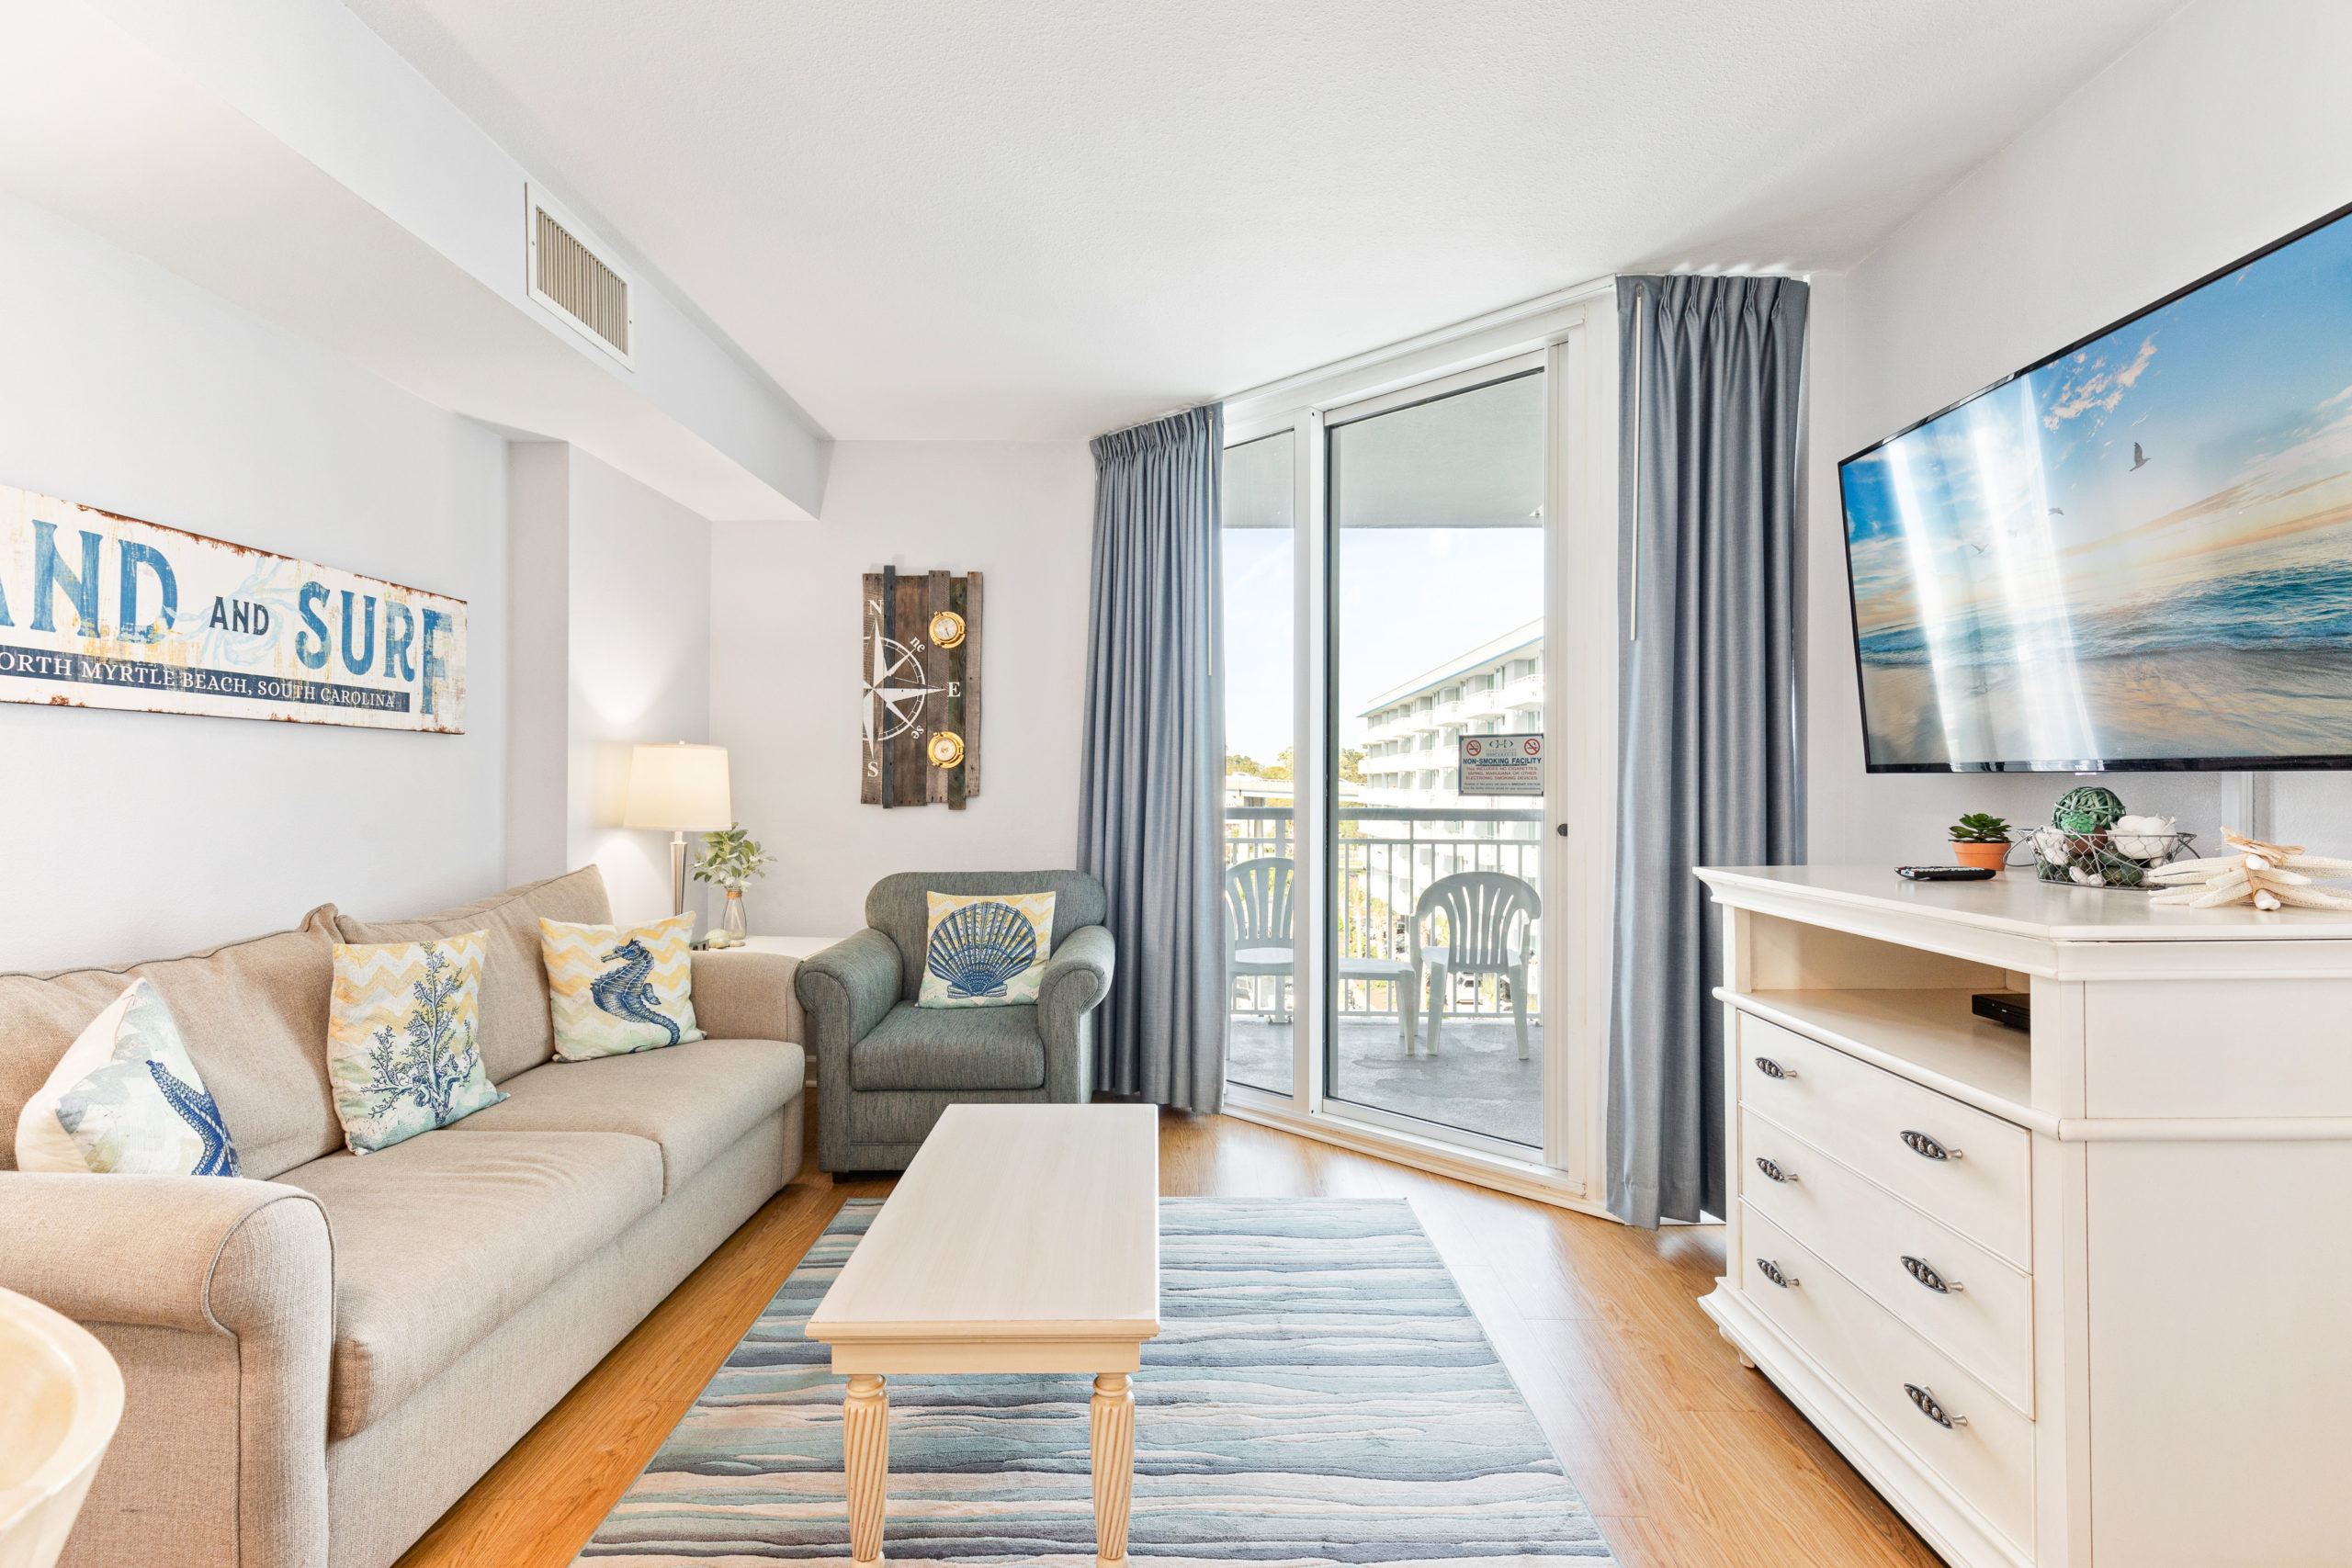 Features 1 king bed, 1 full sleeper sofa, 1 bathroom, a private balcony overlooking the marina, fully-equipped kitchen, dishwasher, and washer and dryer.